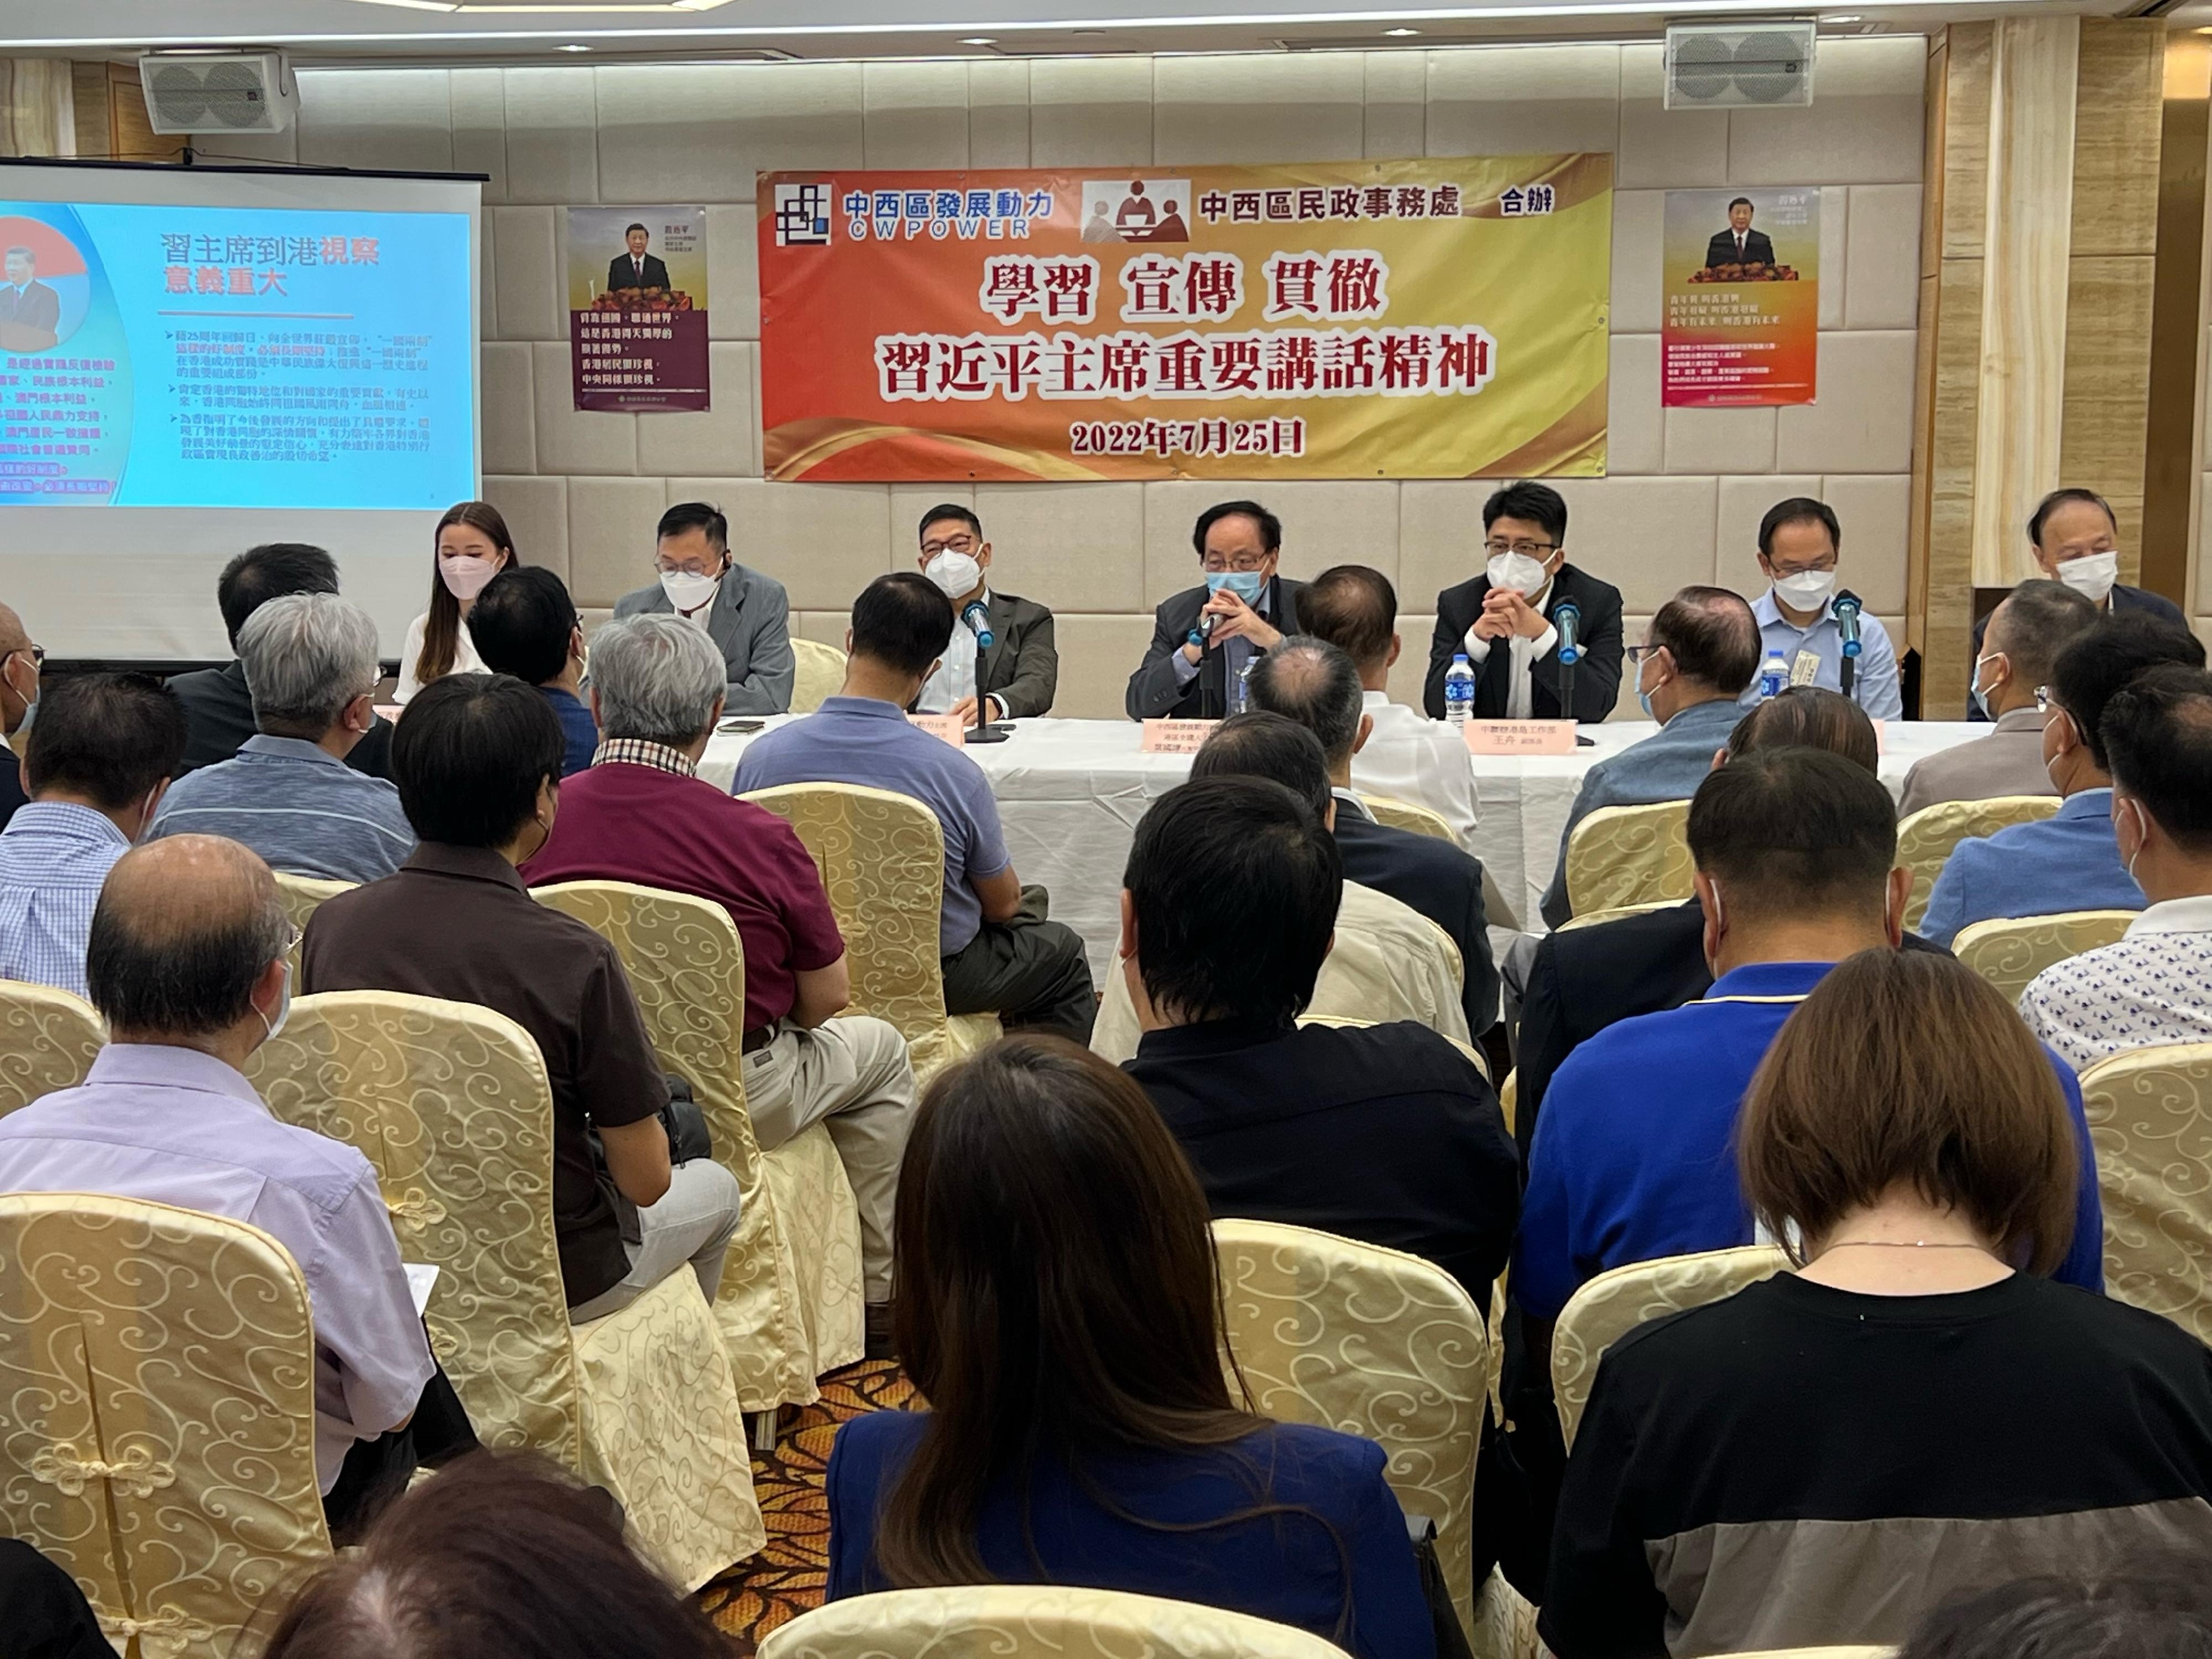 The Central and Western District Office, in collaboration with CW Power, jointly held the "Session to Learn About, Promote and Implement the Spirit of President Xi's Important Speech" in Central on July 25. Photo shows participants listening attentively to the speakers.